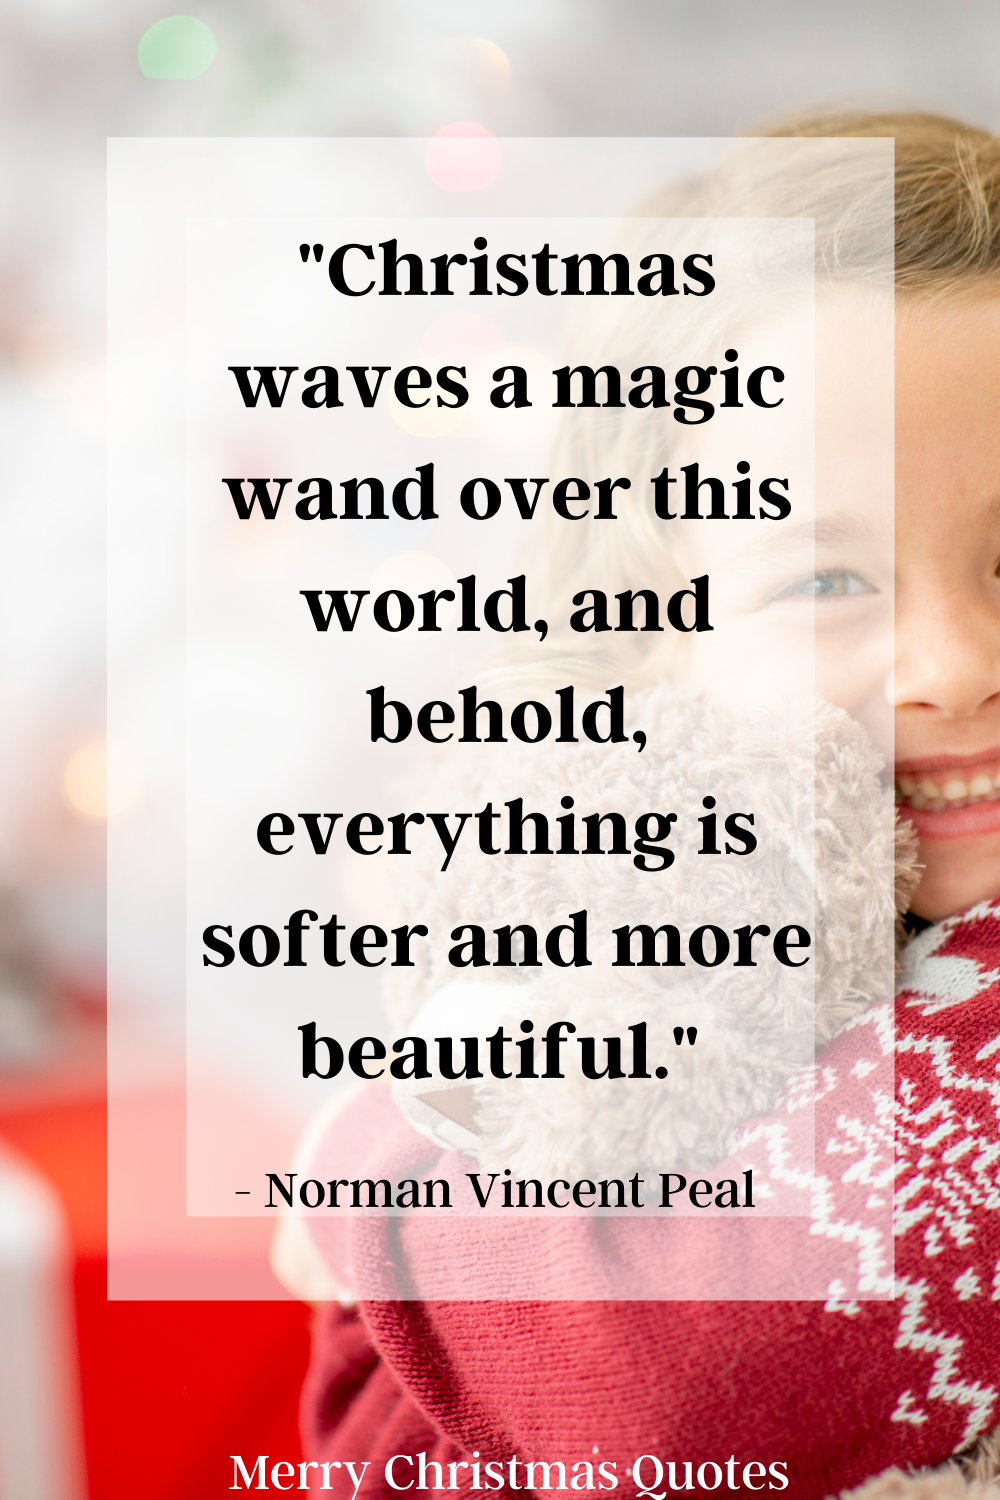 101 Amazing Kids Christmas Quotes 2021 - Merry Christmas Quotes